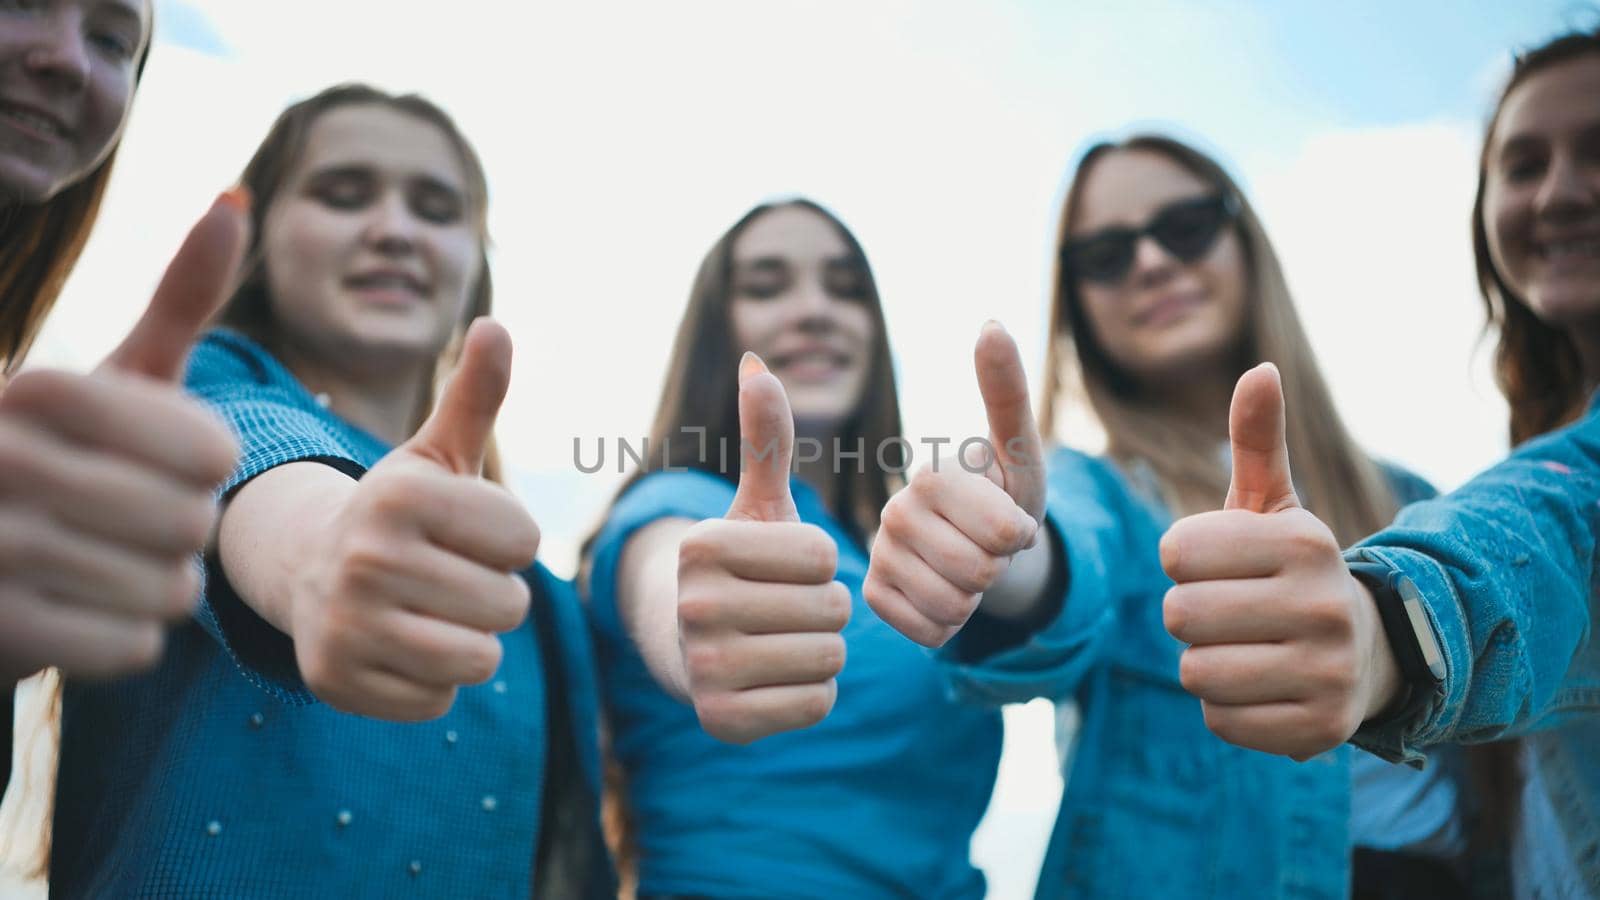 A group of girls girlfriends show thumbs up